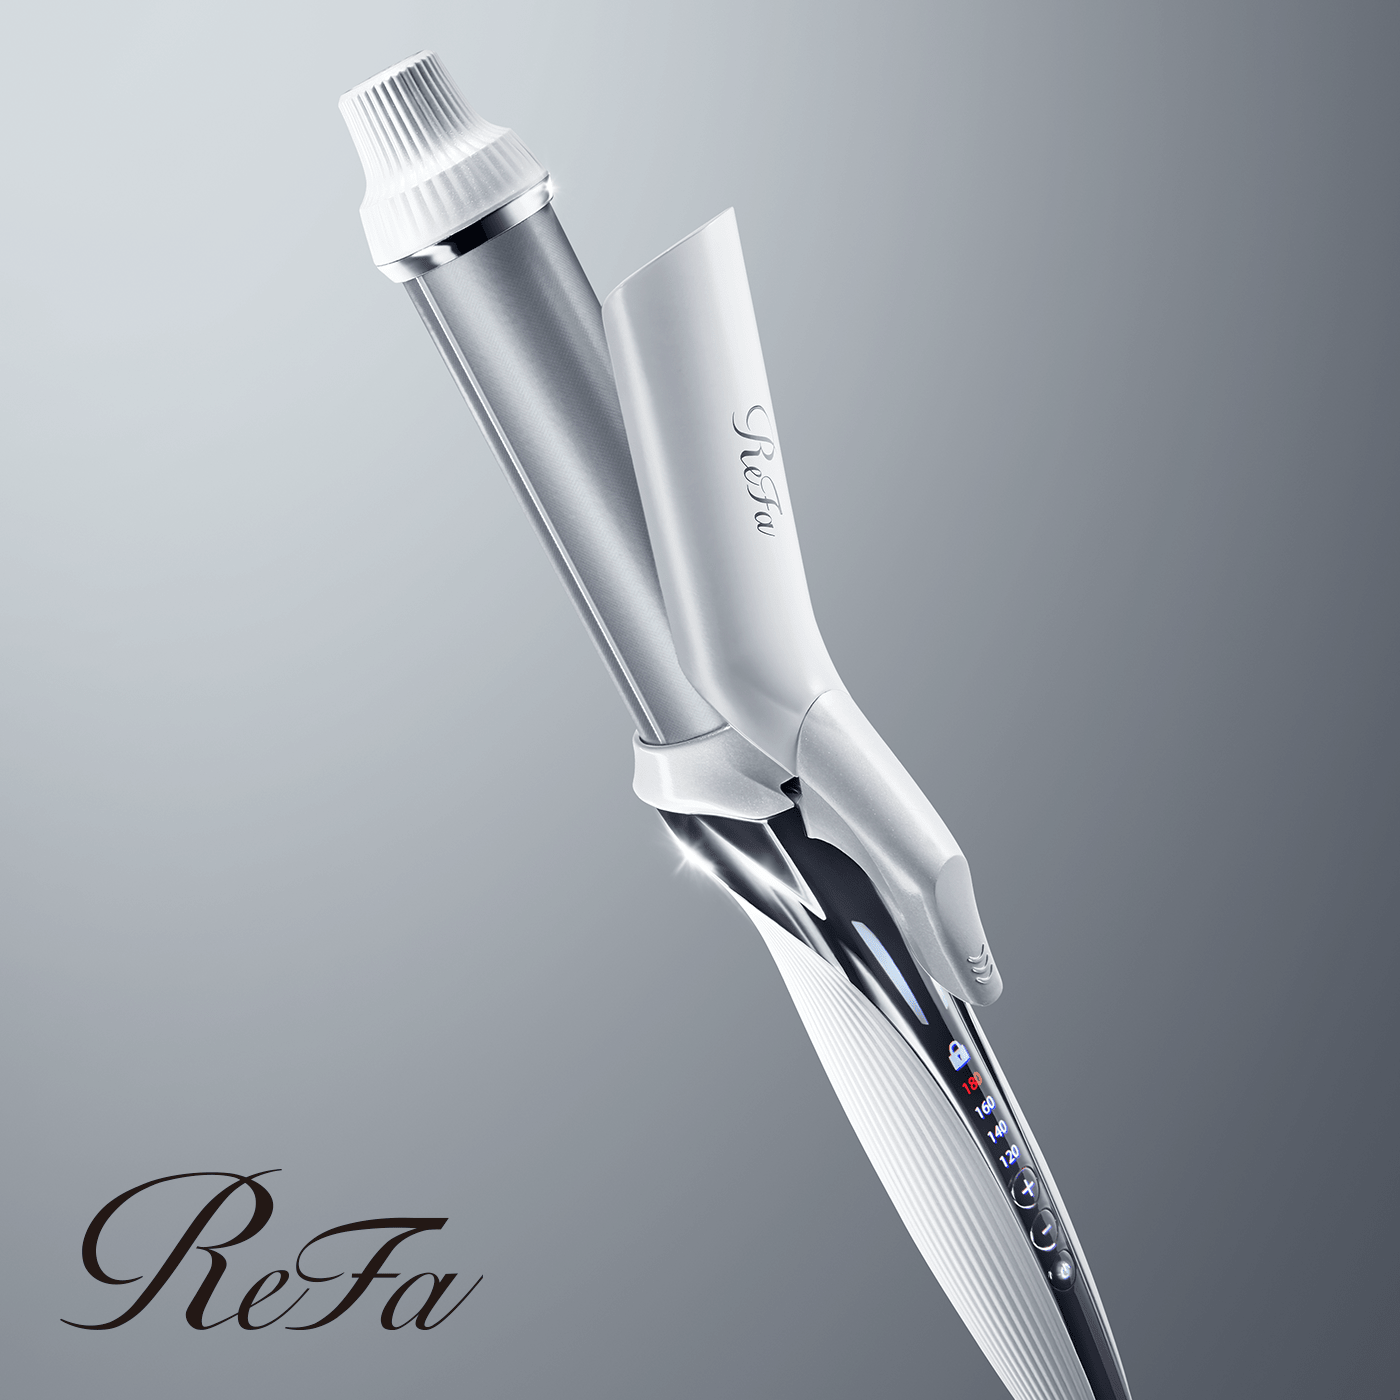 Introducing the ReFa BEAUTECH CURL IRON, a hairstyling tool outfitted with original Carbon Layer Plates to help you create beautiful, long-lasting curls with a silky soft, healthy-looking finish. 